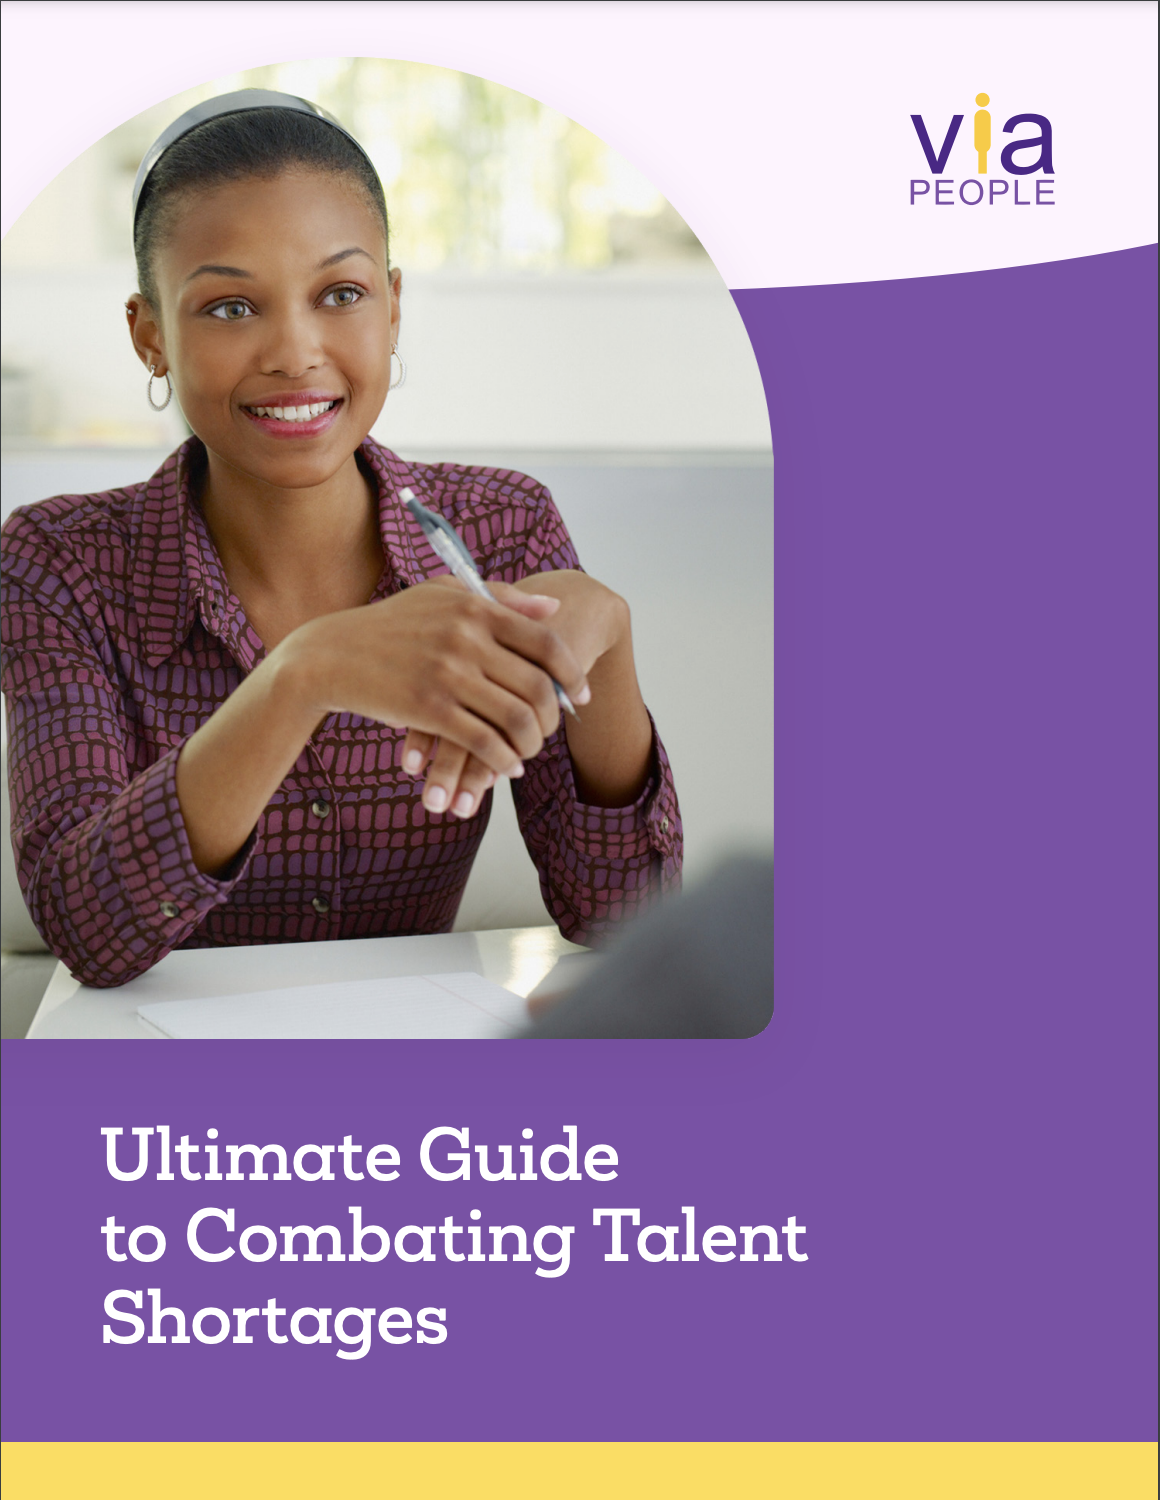 Cover of the ultimate guide to combating talent shortages